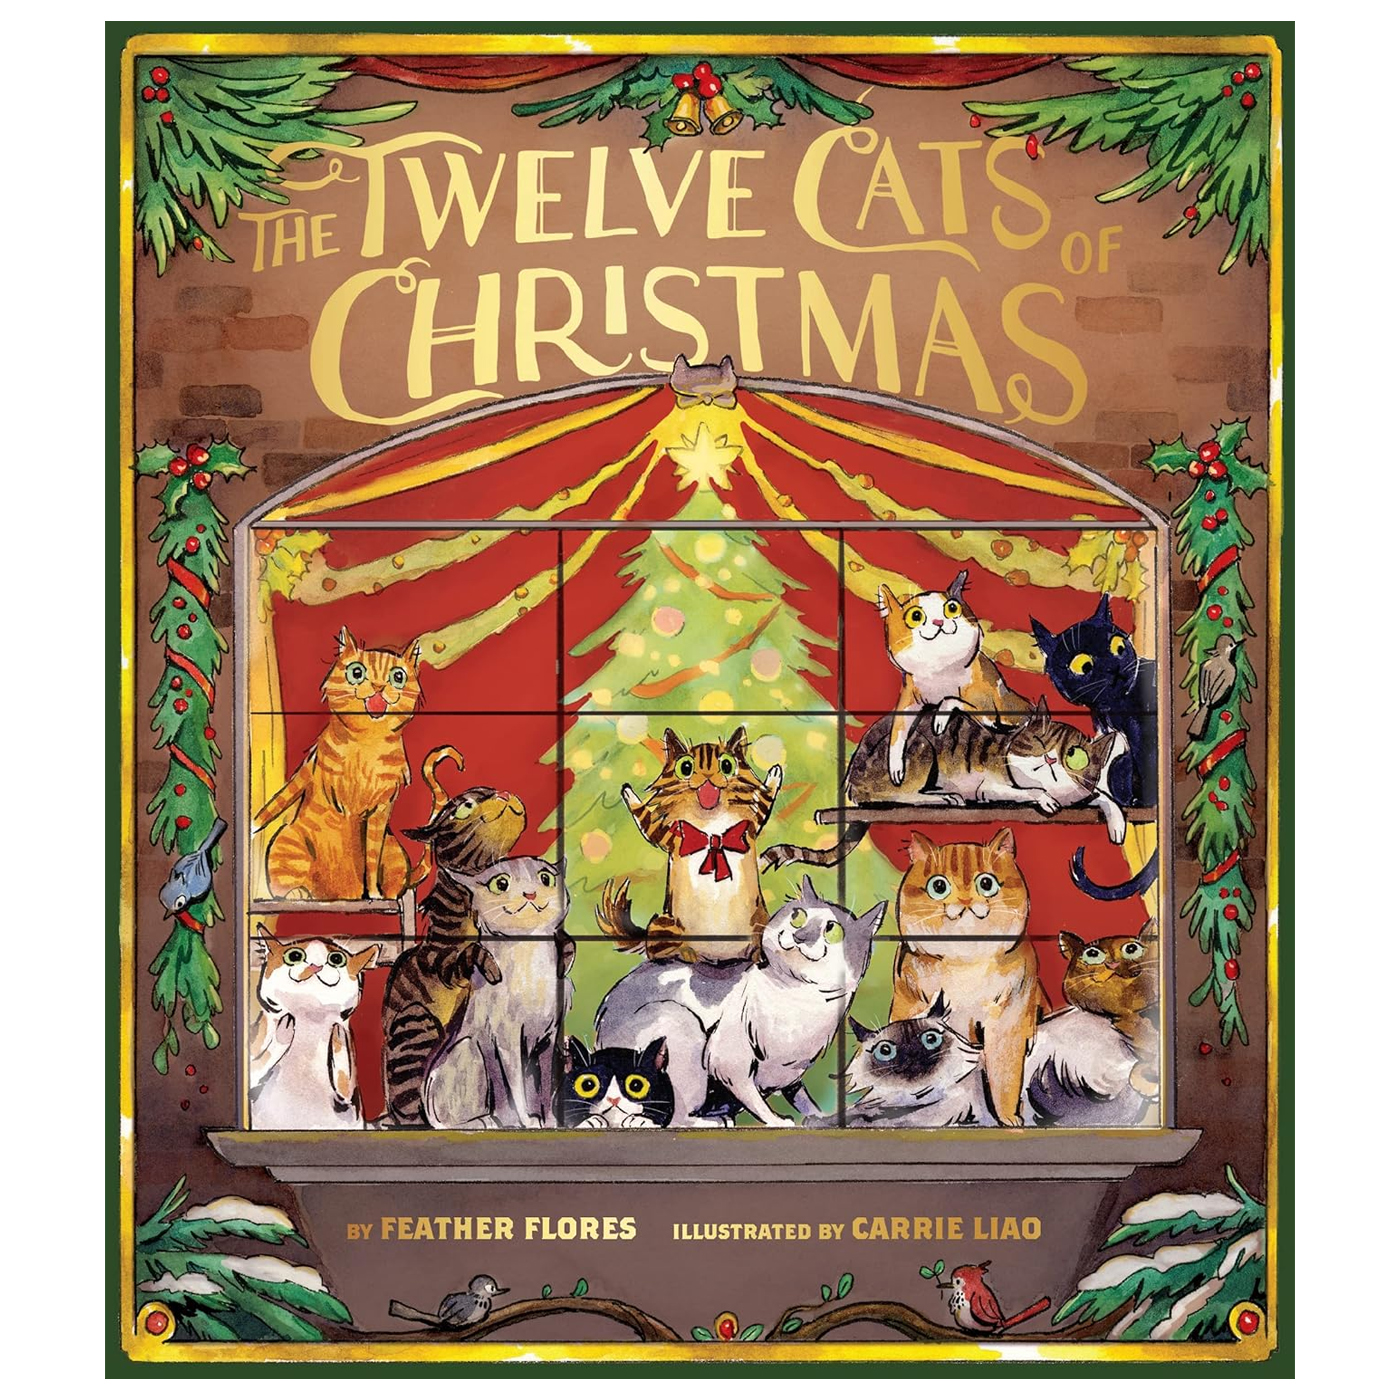  The Twelve Cats of Christmas